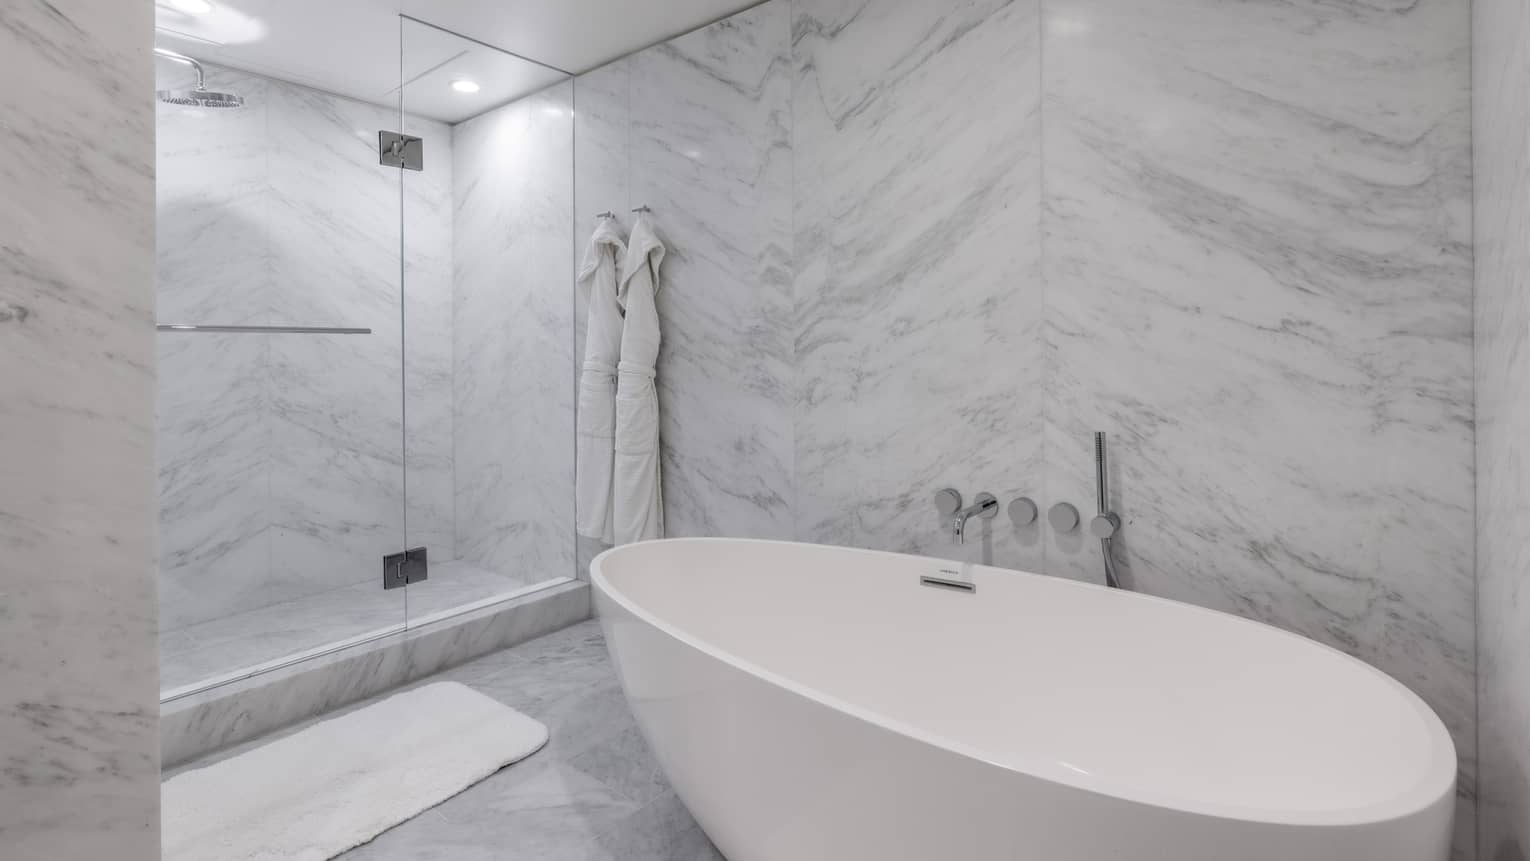 Marble bathroom with freestanding oval tub, walk-in glass shower